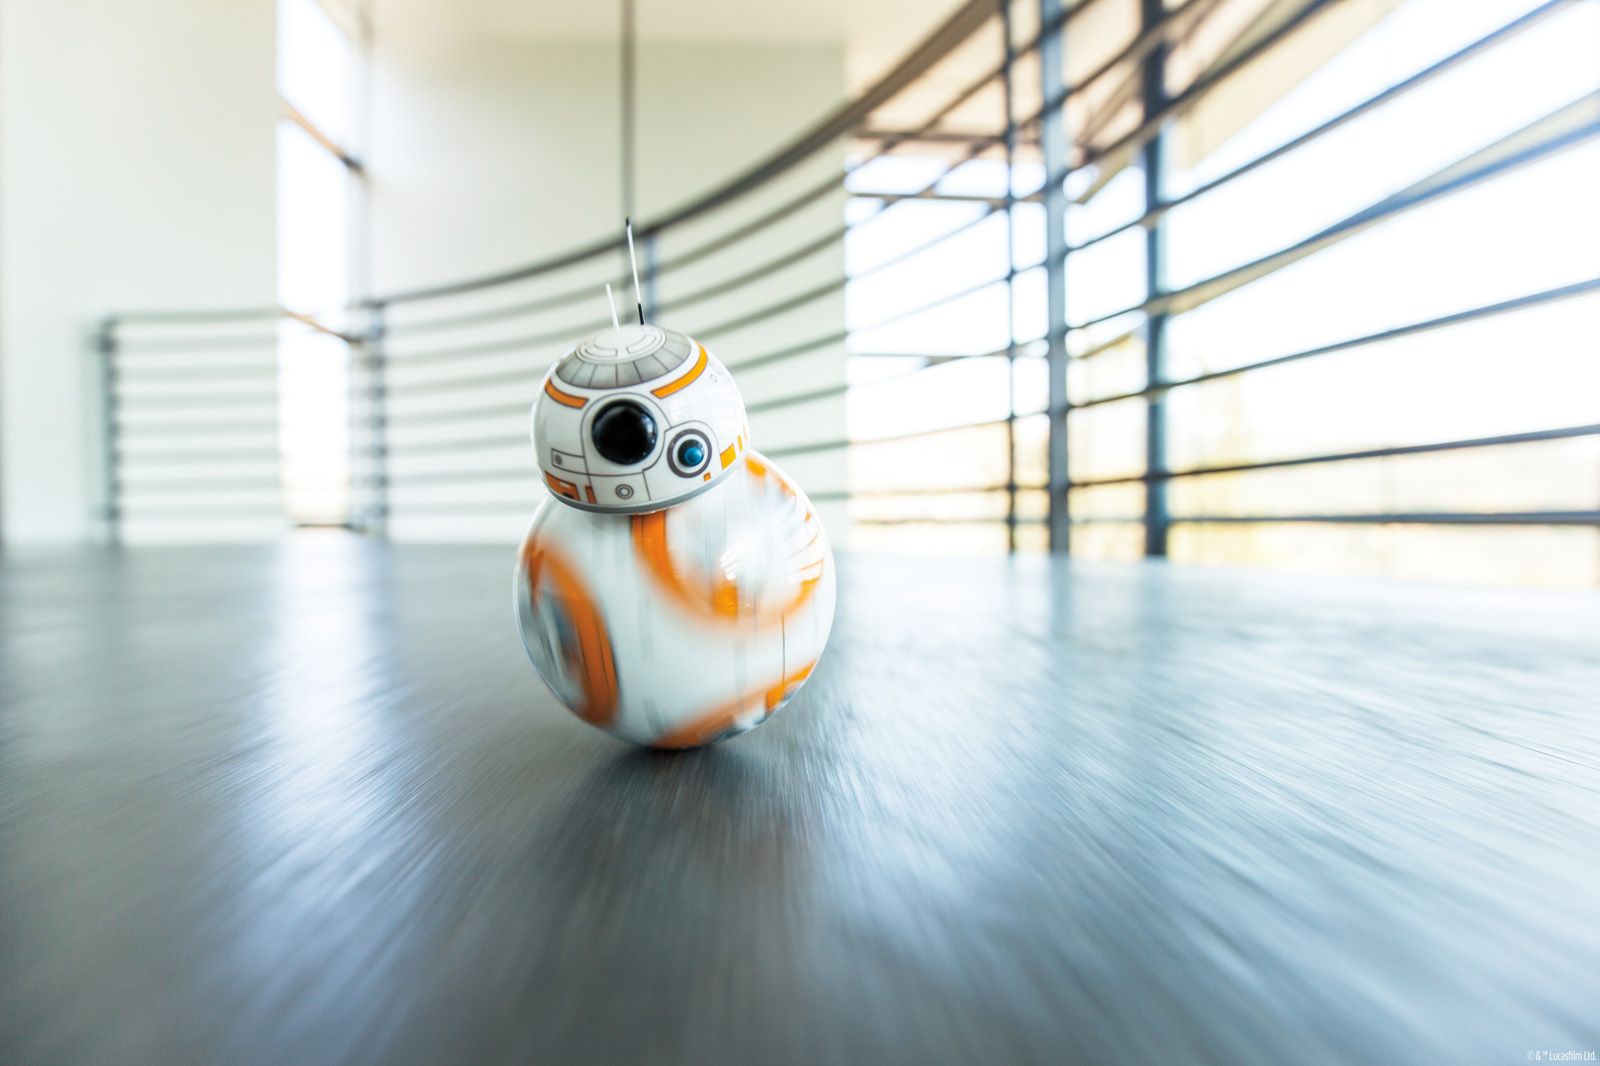 you can get your own working bb 8 rolling droid from star wars the force awakens thanks to sphero image 1